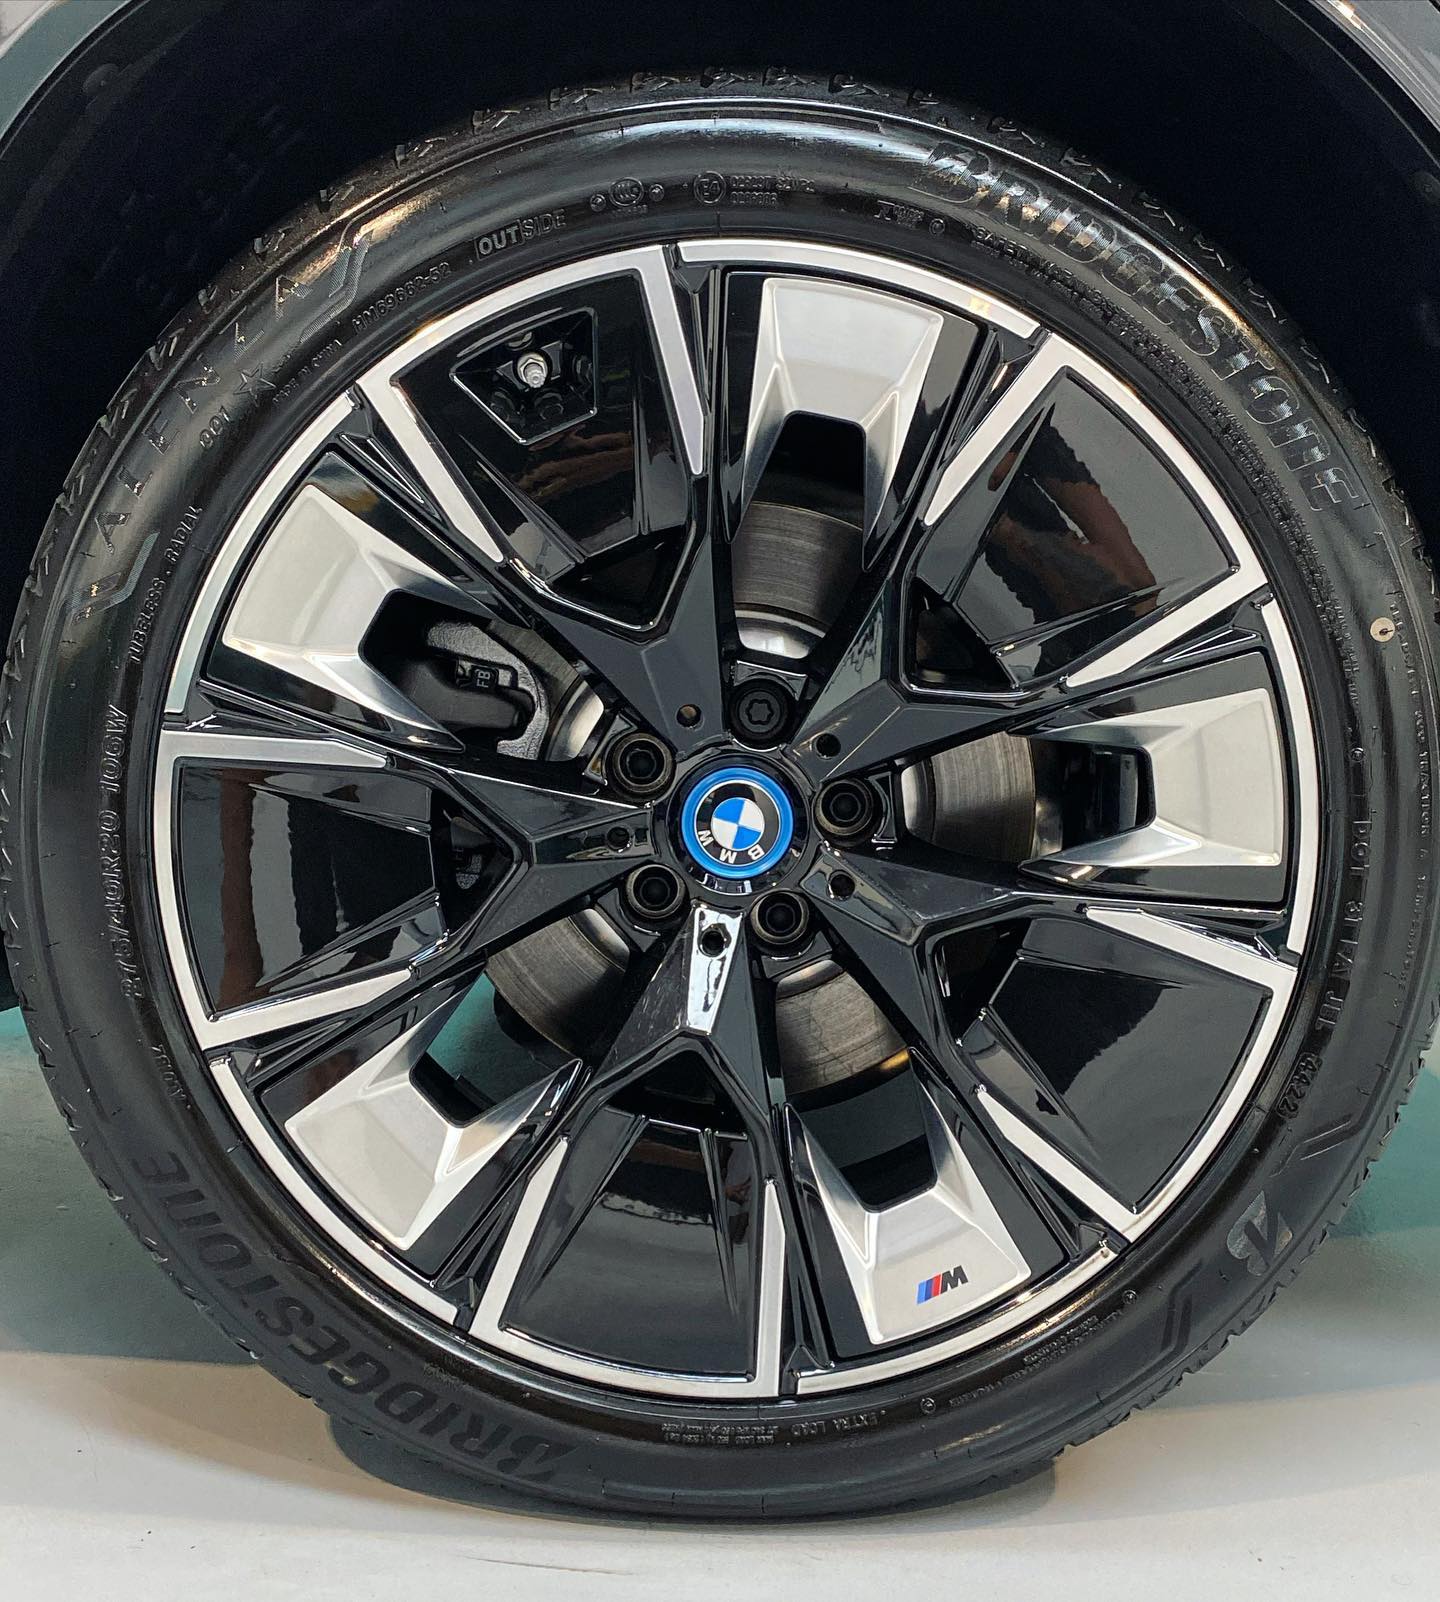 Close-up of a bmw wheel with a black and silver rim, featuring the bmw logo and an m badge.